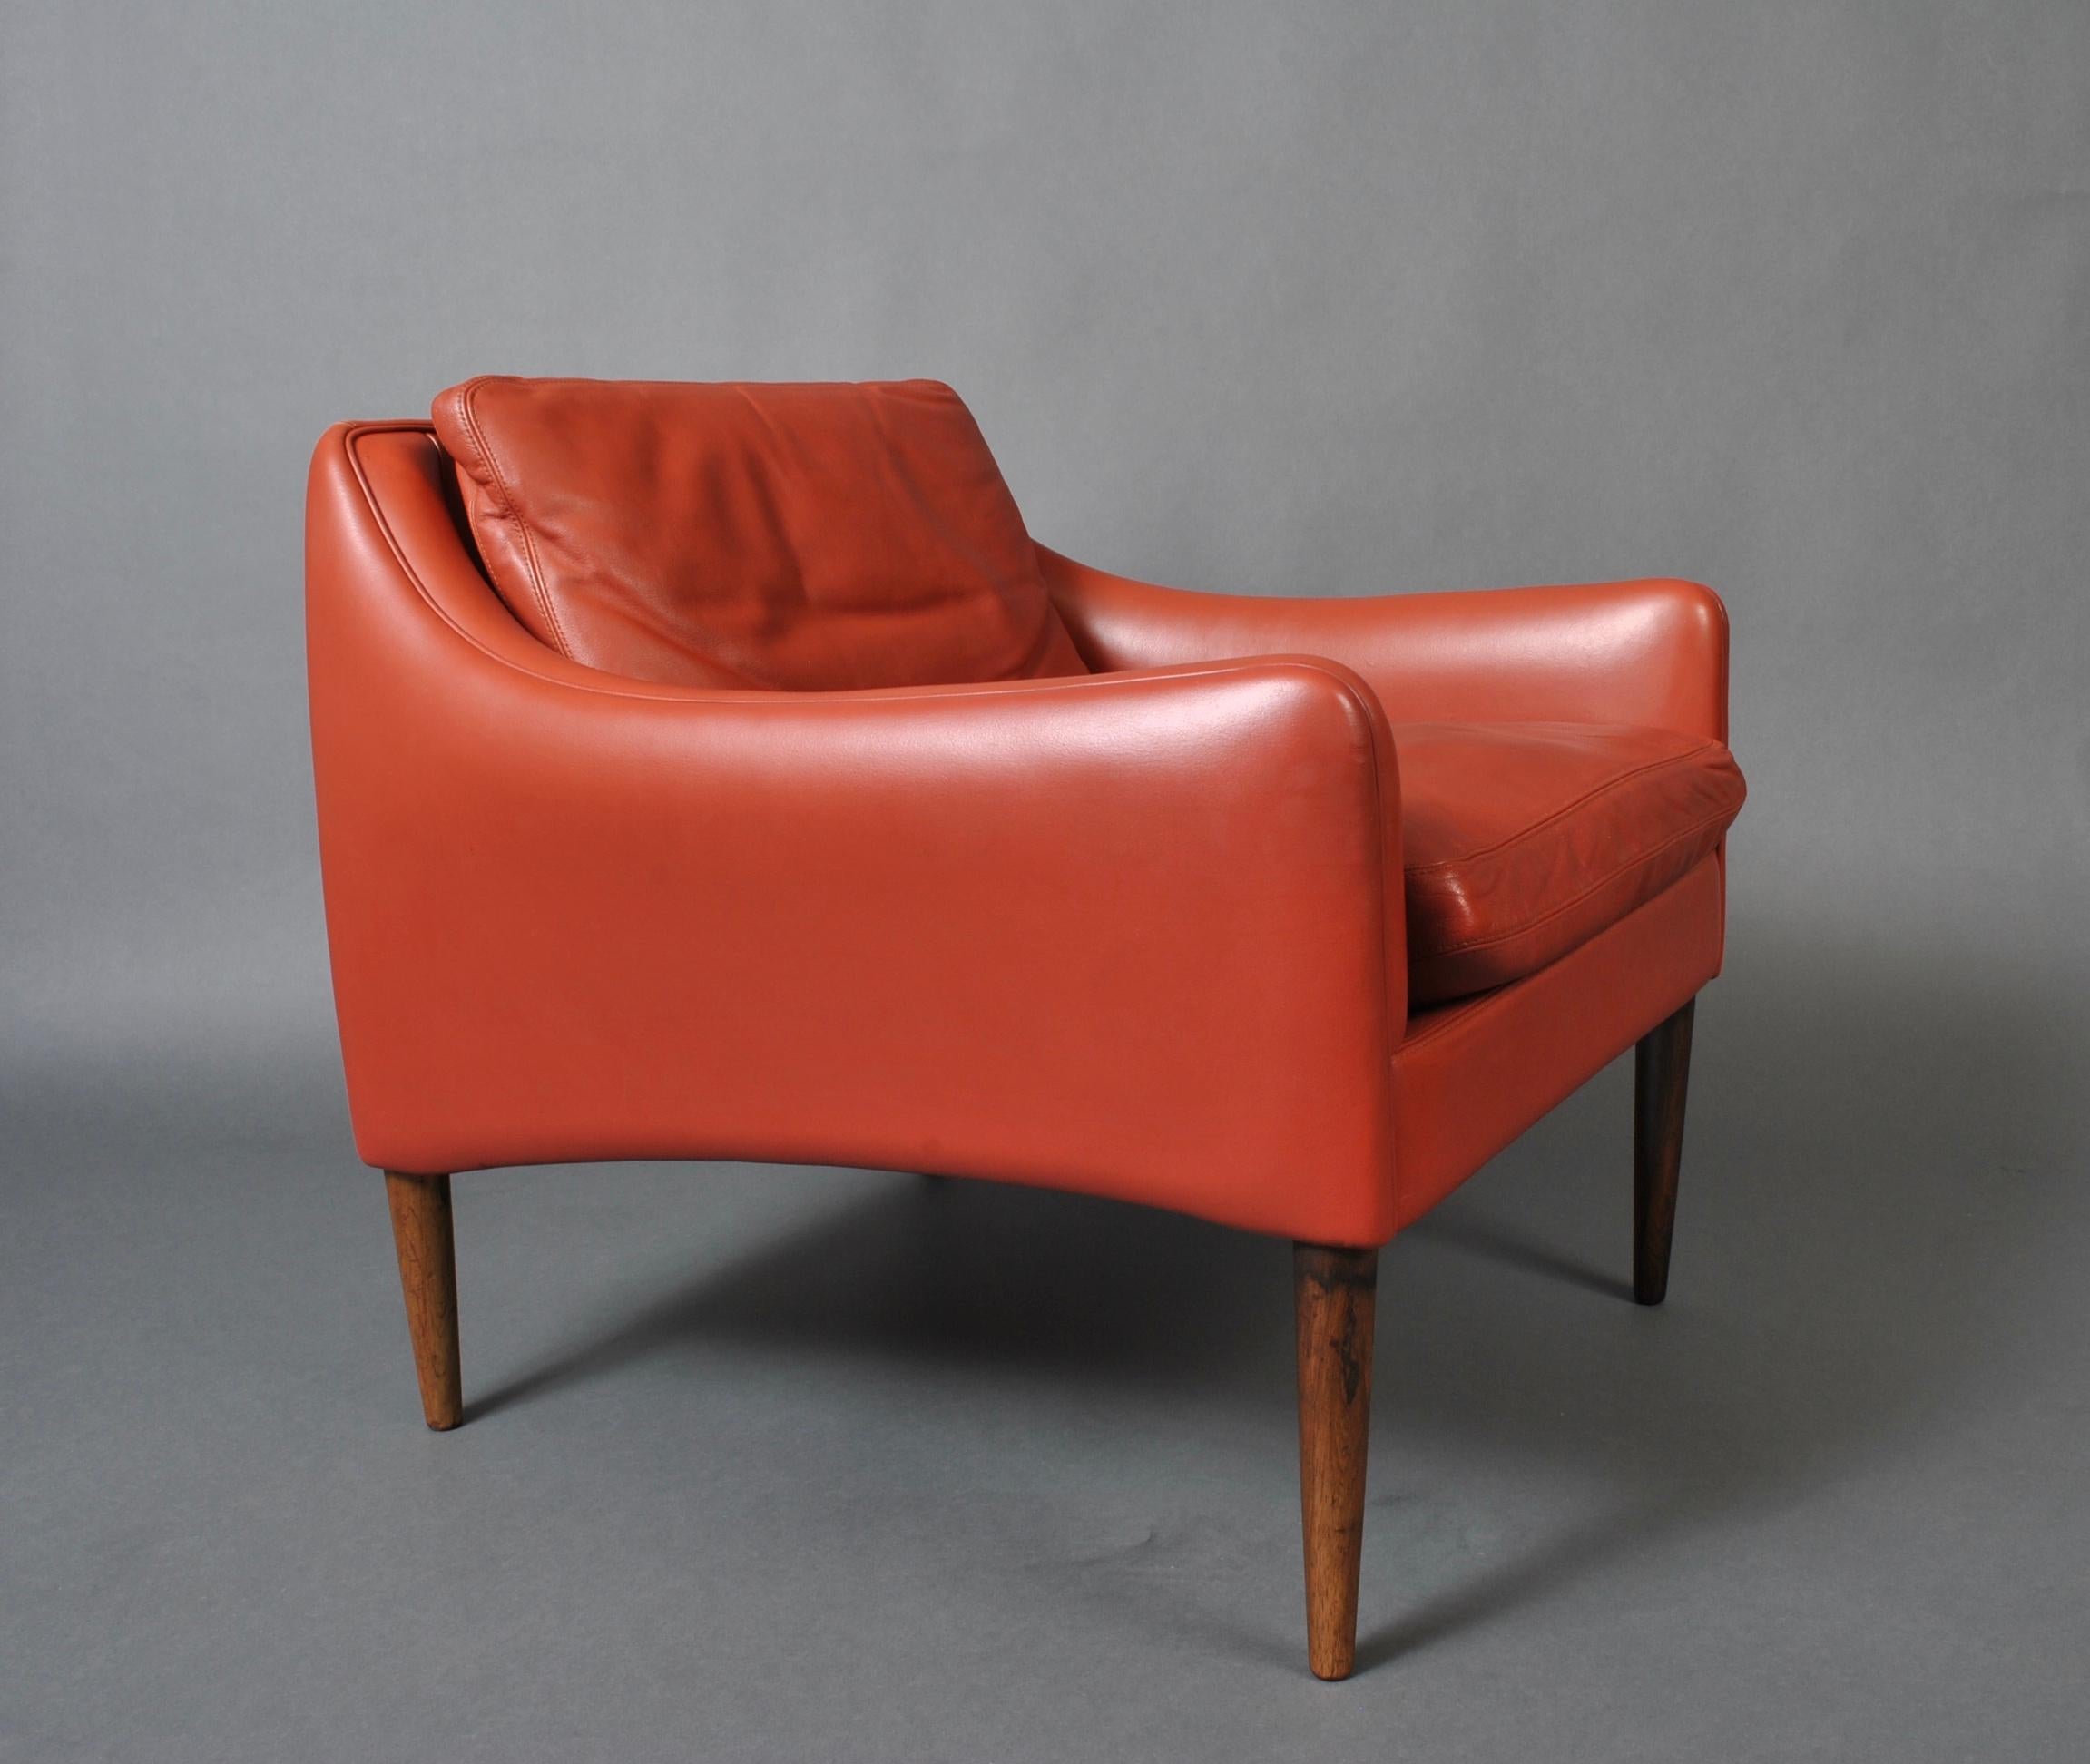 Superb matching pair of leather club, armchairs. Designed by Hans Olsen for CS Mobler, circa late 1950s. Model 800. Wonderful color and quality leather. Duck down filled soft cushions.
The curved organic lines are absolutely stunning.
Scandinavian